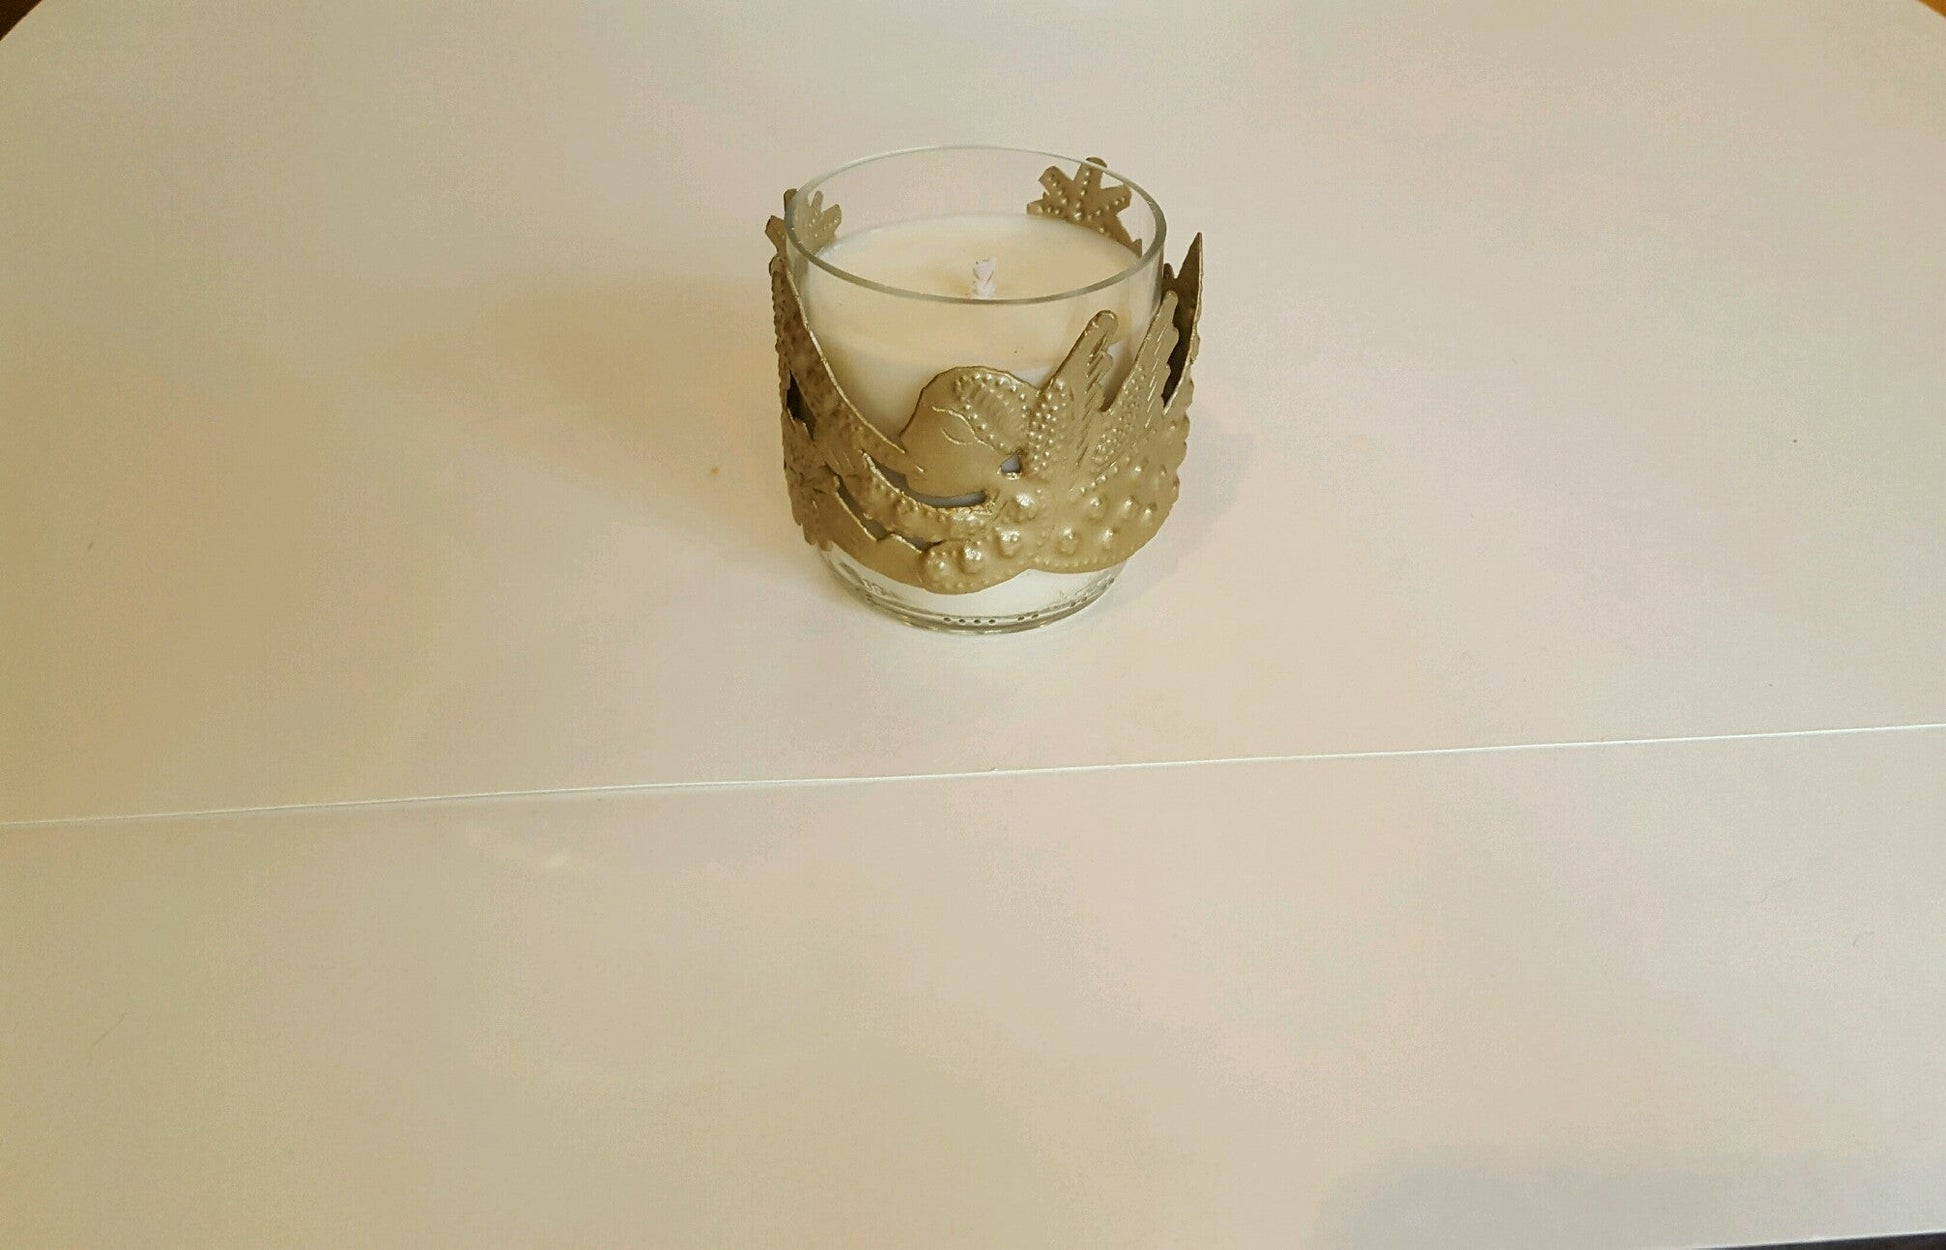 Wrap Container Candles